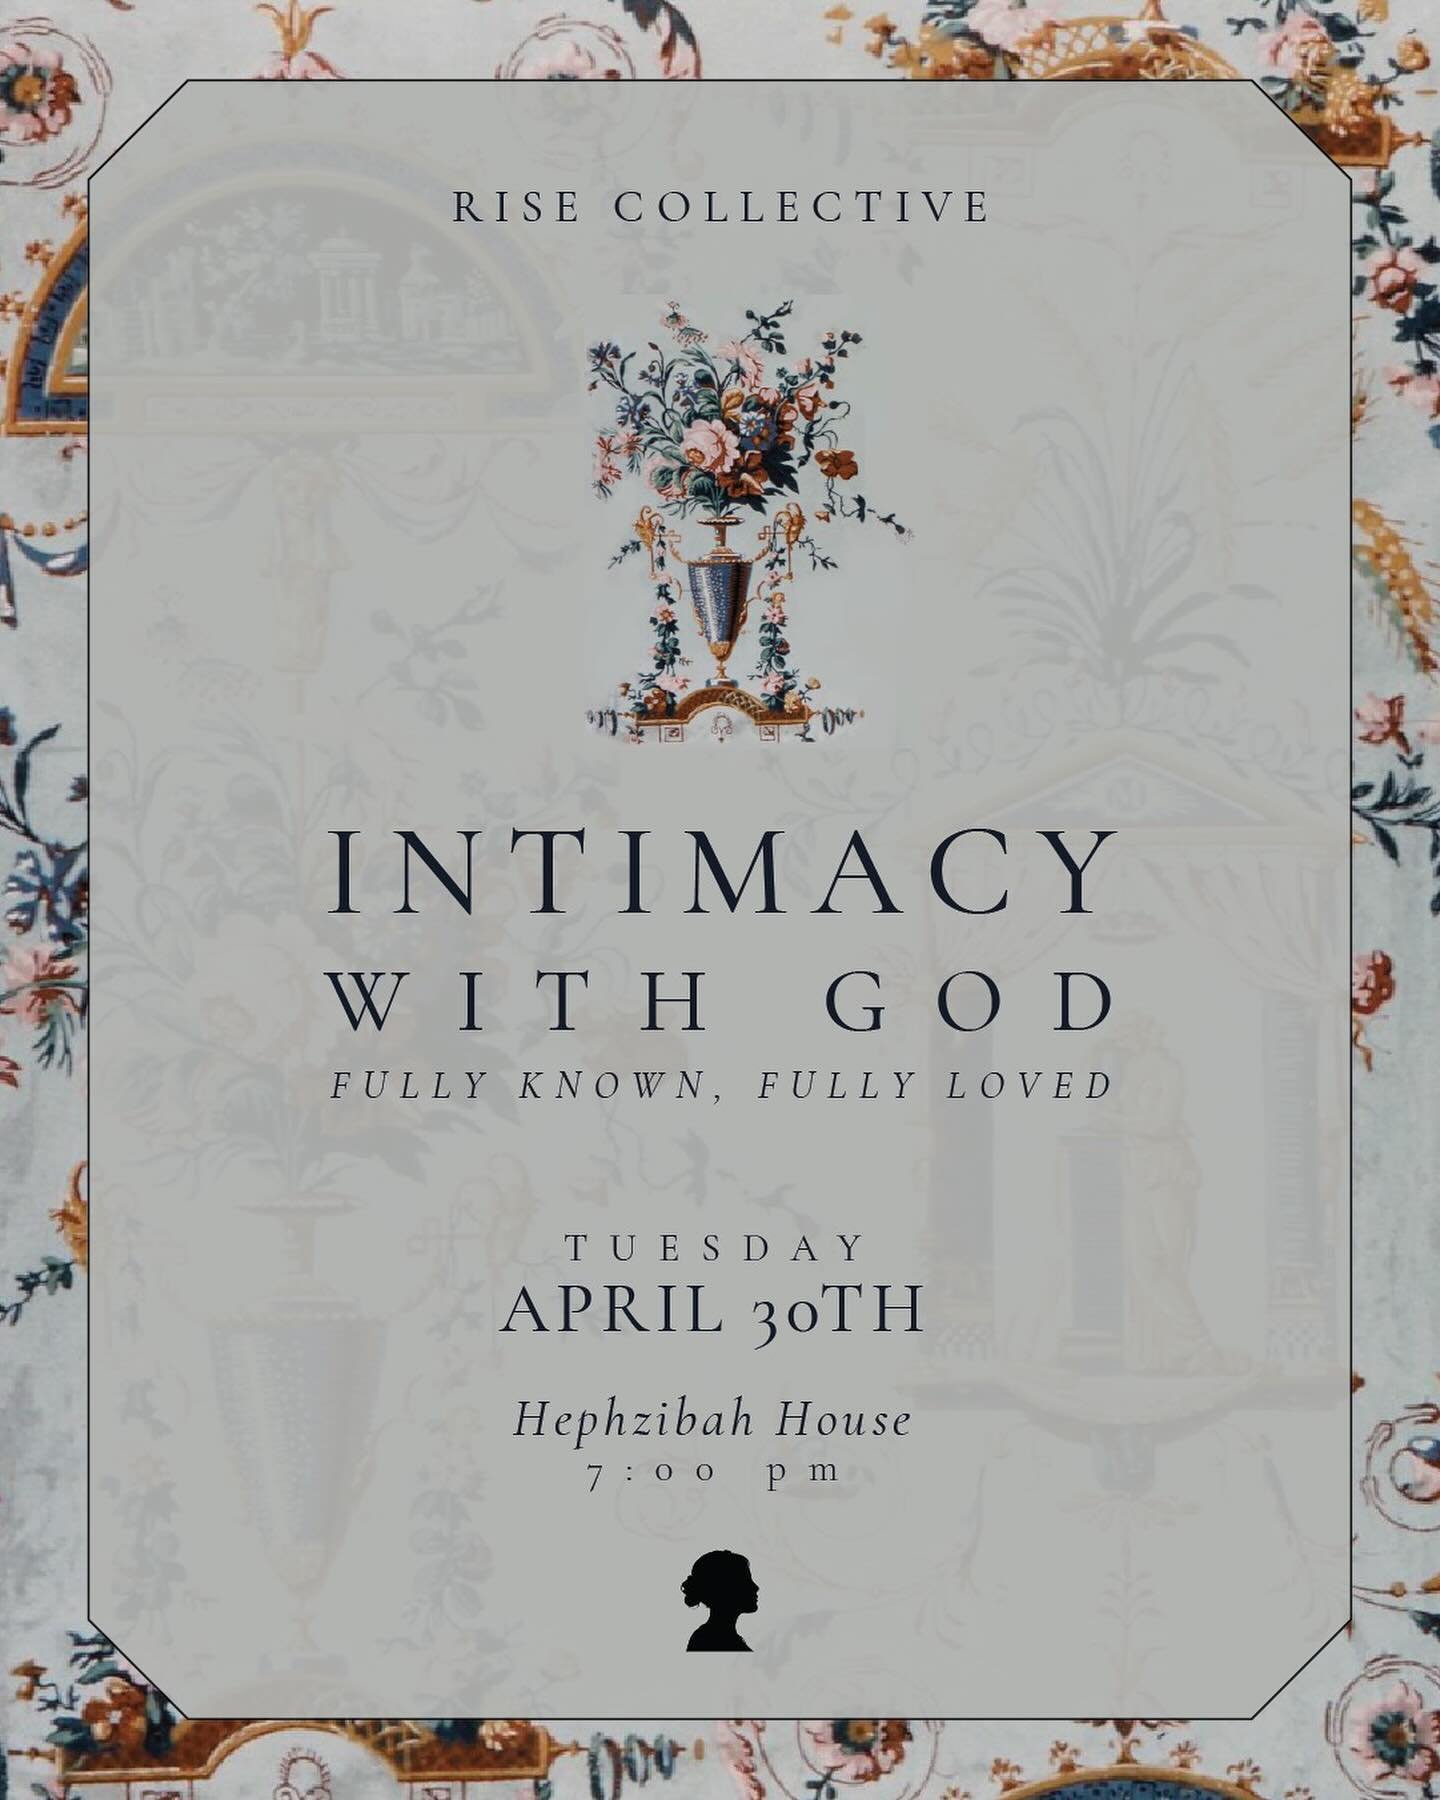 Join us for our 3rd Conversations with Spiritual Mothers gathering on building Intimacy with God. We will be joined by two of our Spiritual Mothers, Natalia Rothman and Olivia Munn-Shirsath. 

God knows you intimately. He knows your thoughts, your fe